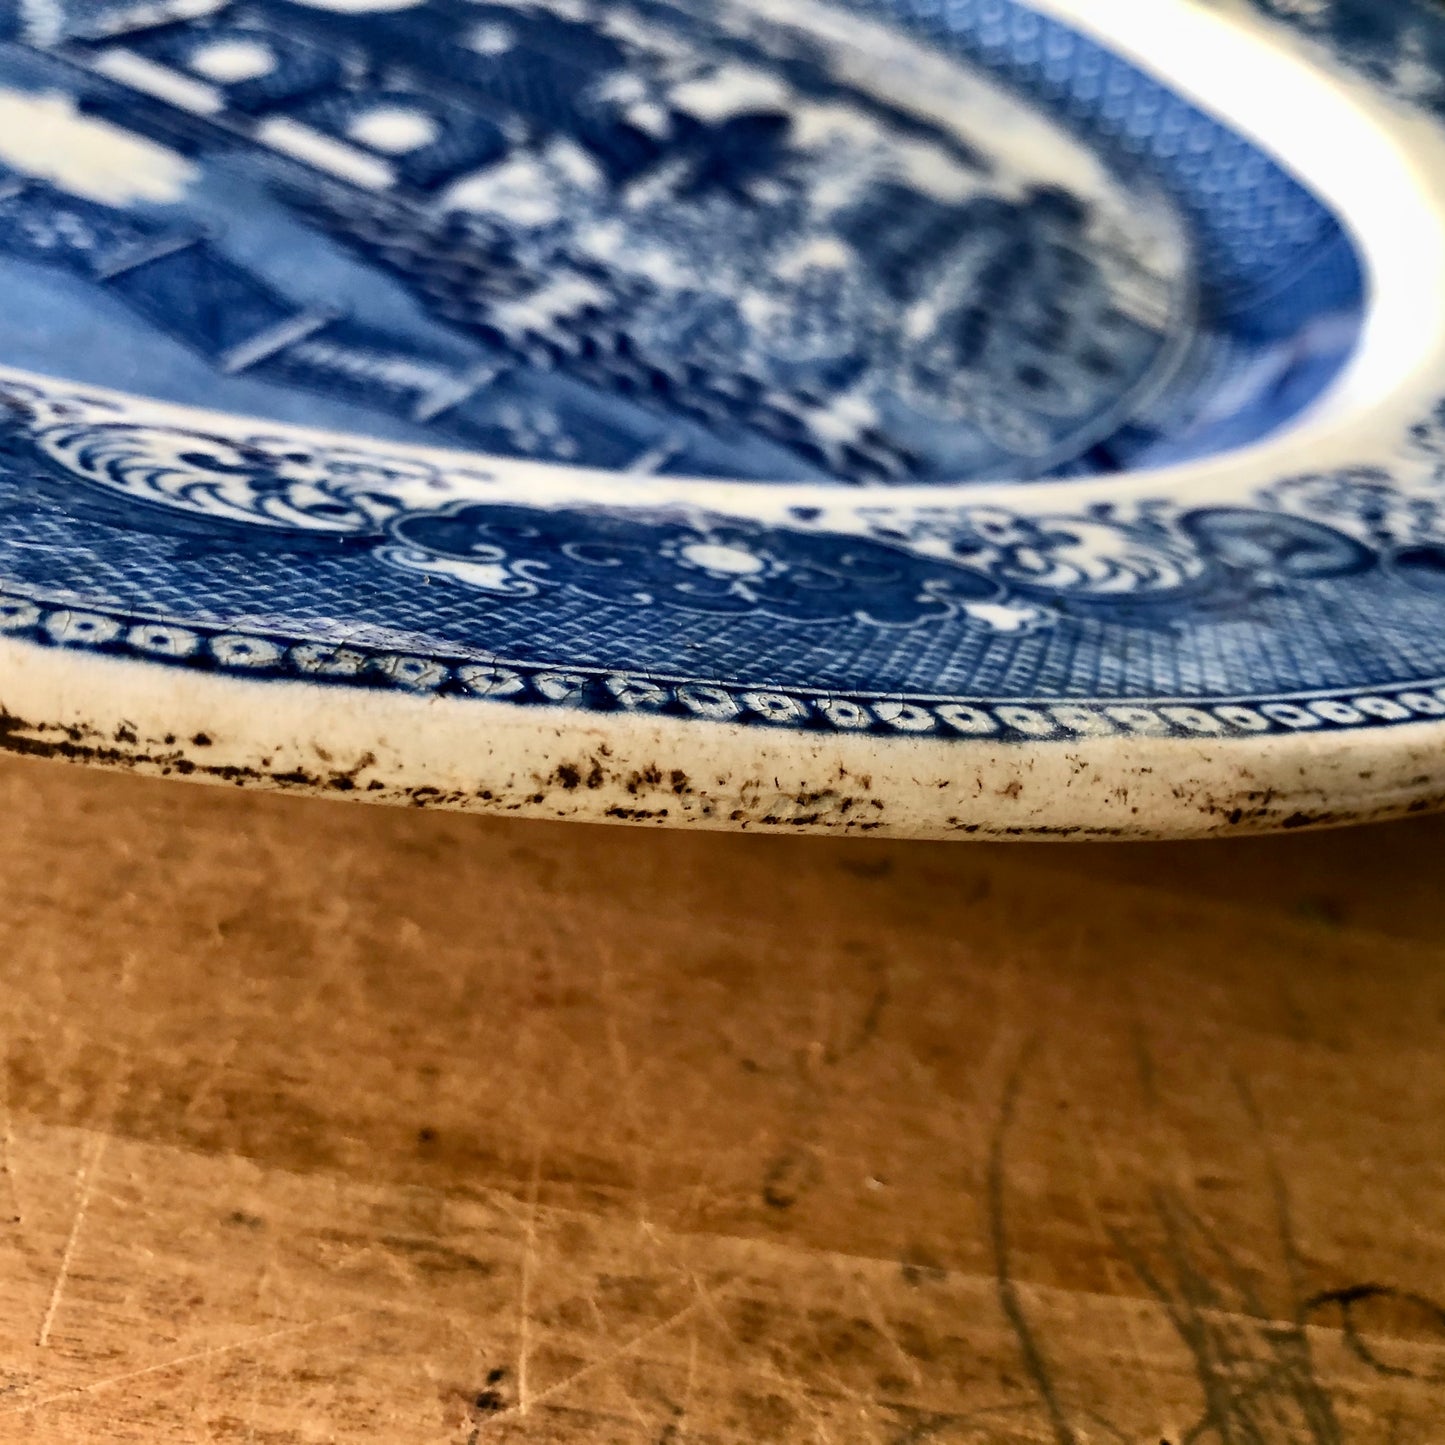 Extra Large Blue Willow Transferware Meat Platter (c.1800s)